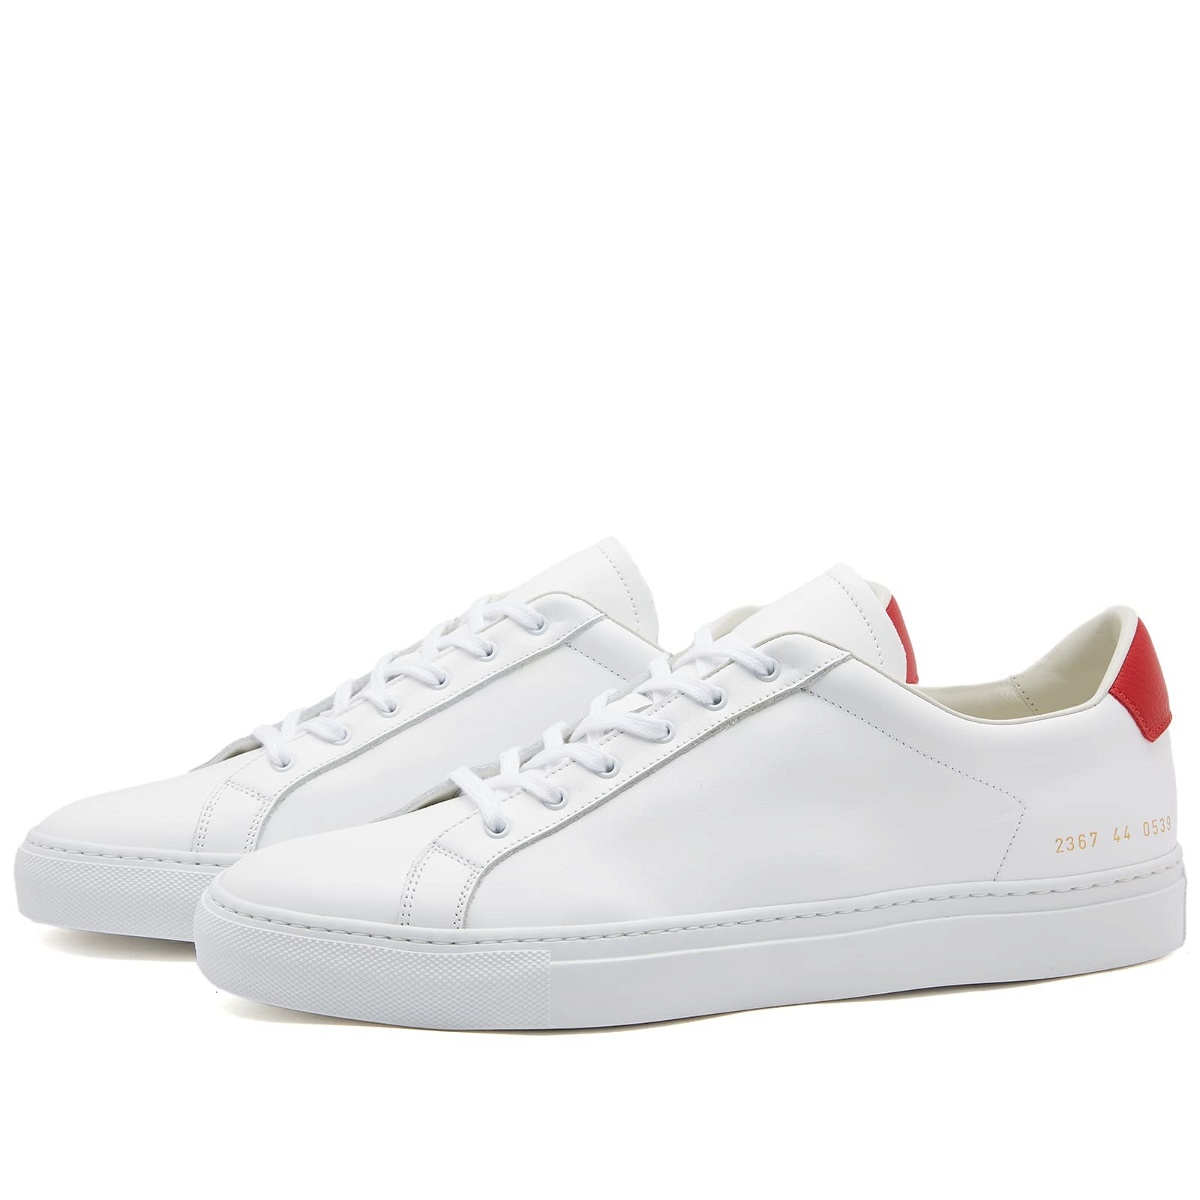 Common Projects Men's Retro Low Sneakers in White/Red Common Projects